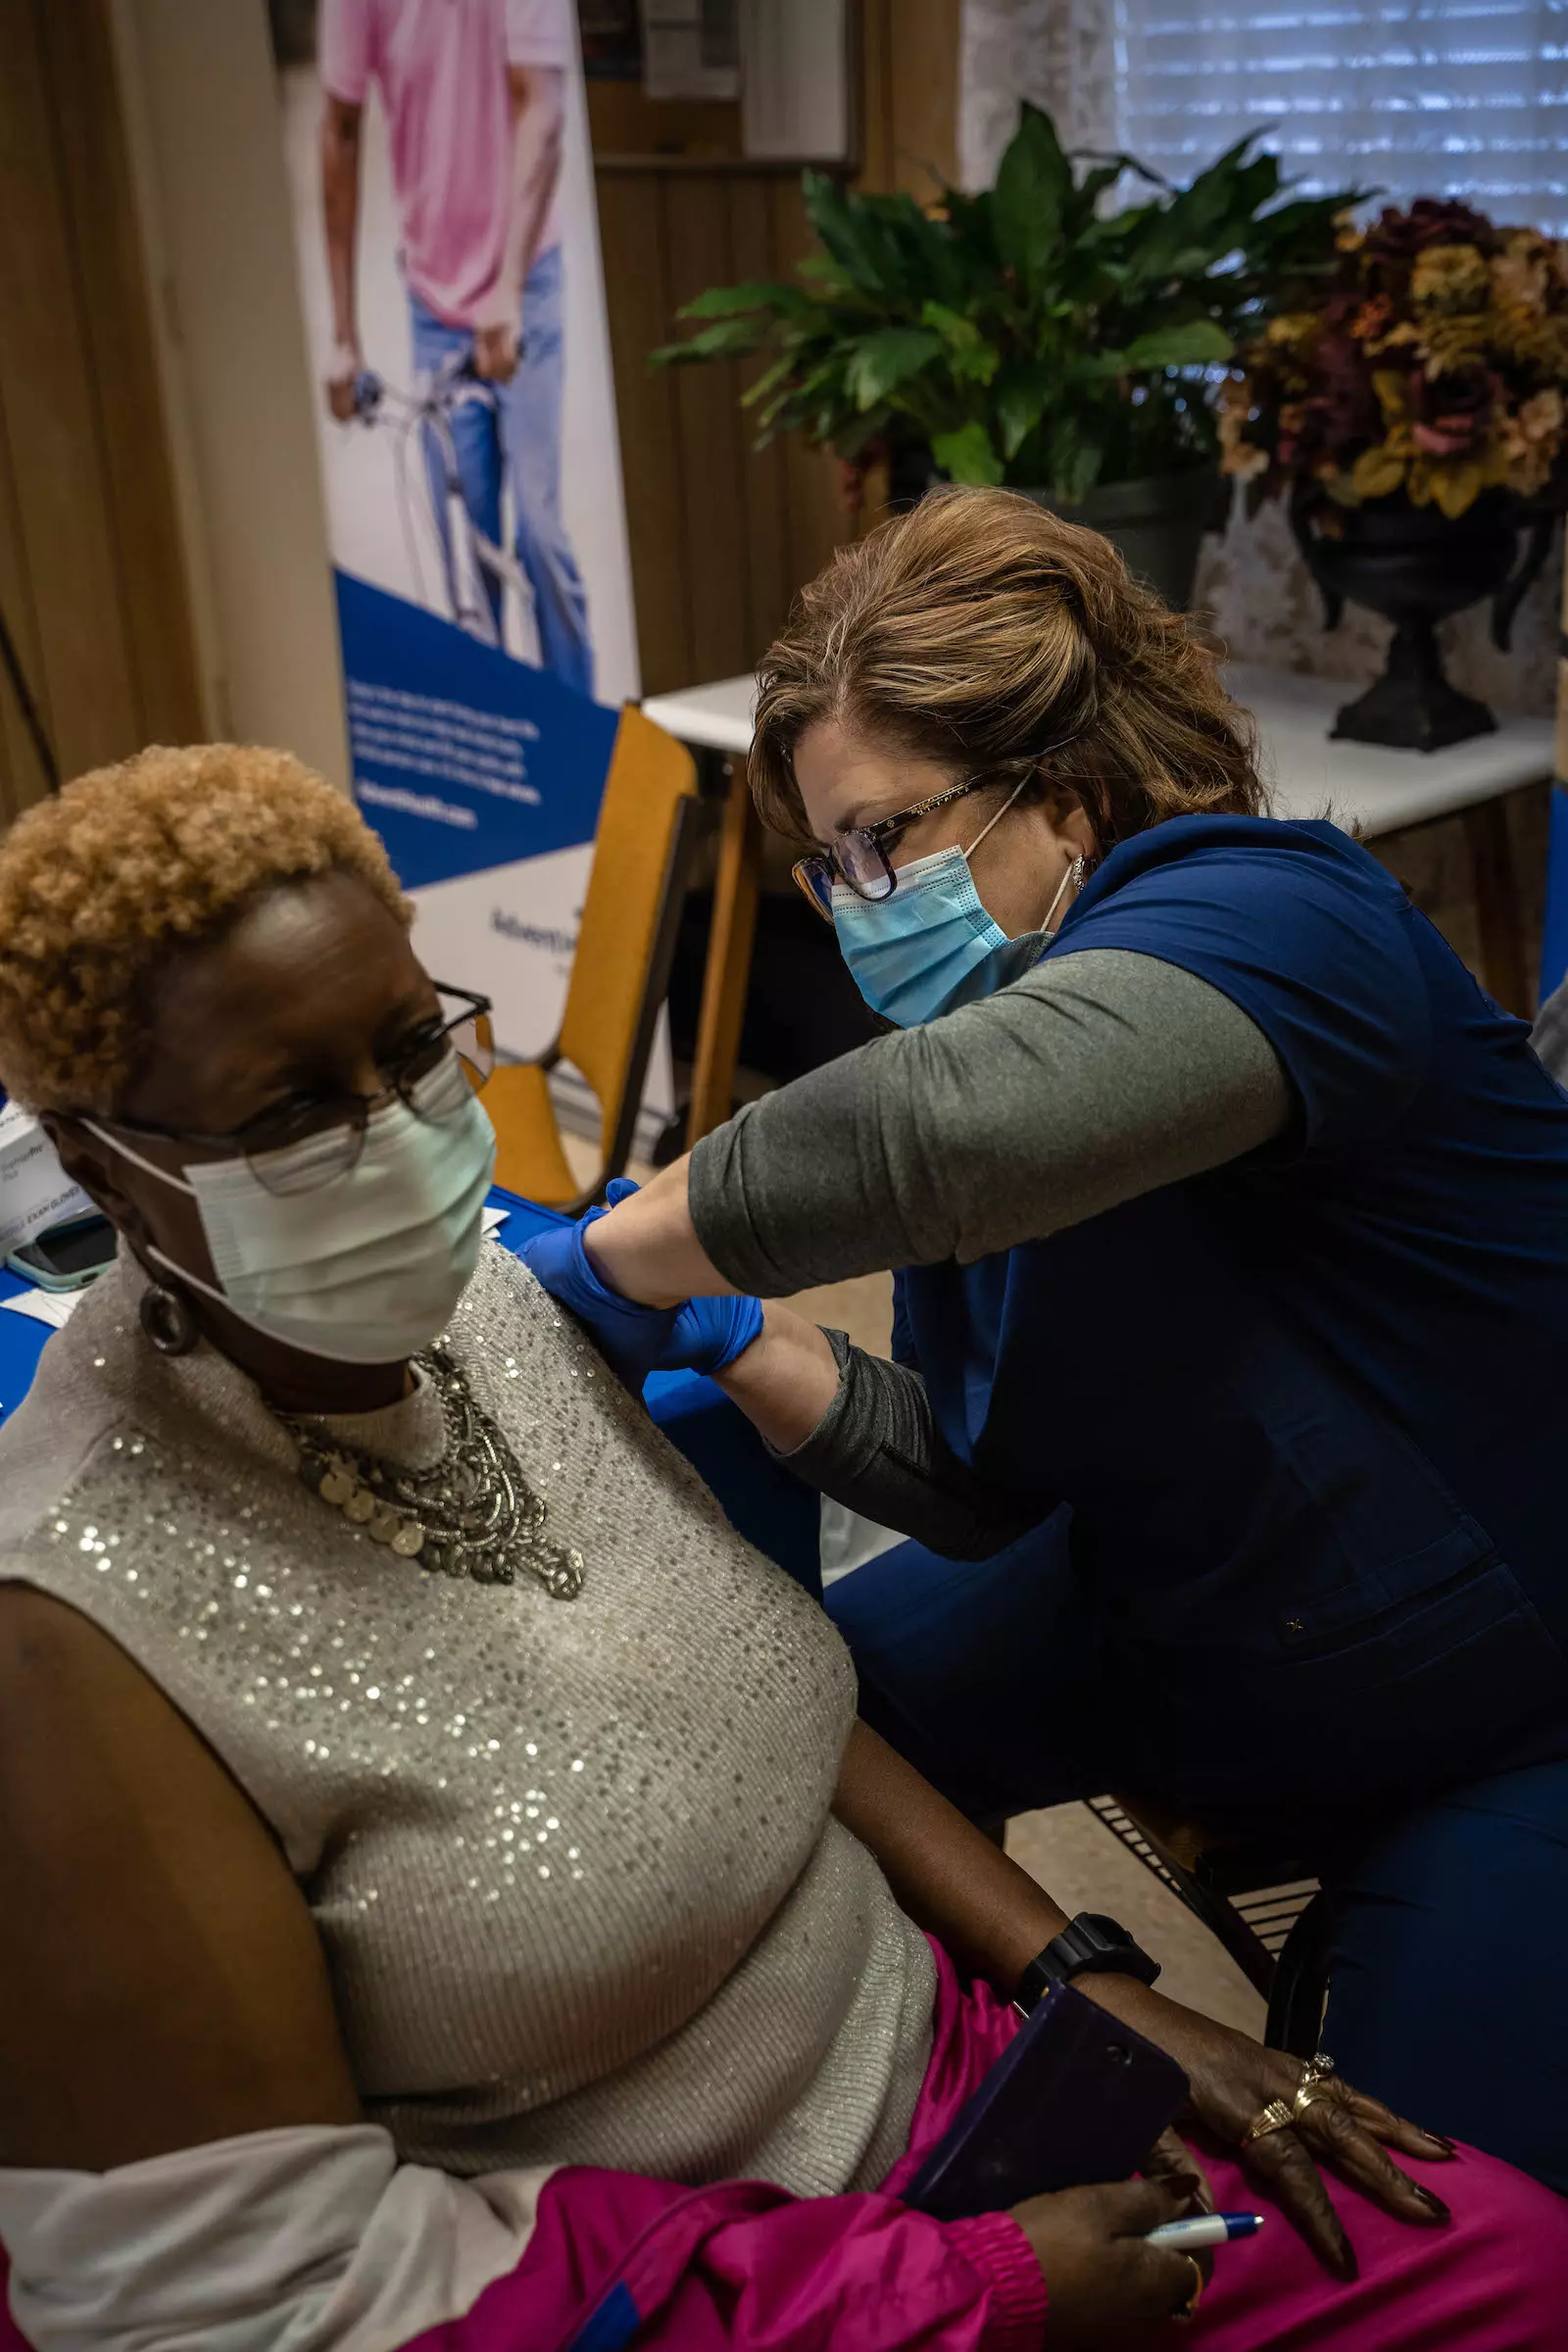 AdventHealth Hendersonville provides COVID-19 vaccines to members of historic African American church.